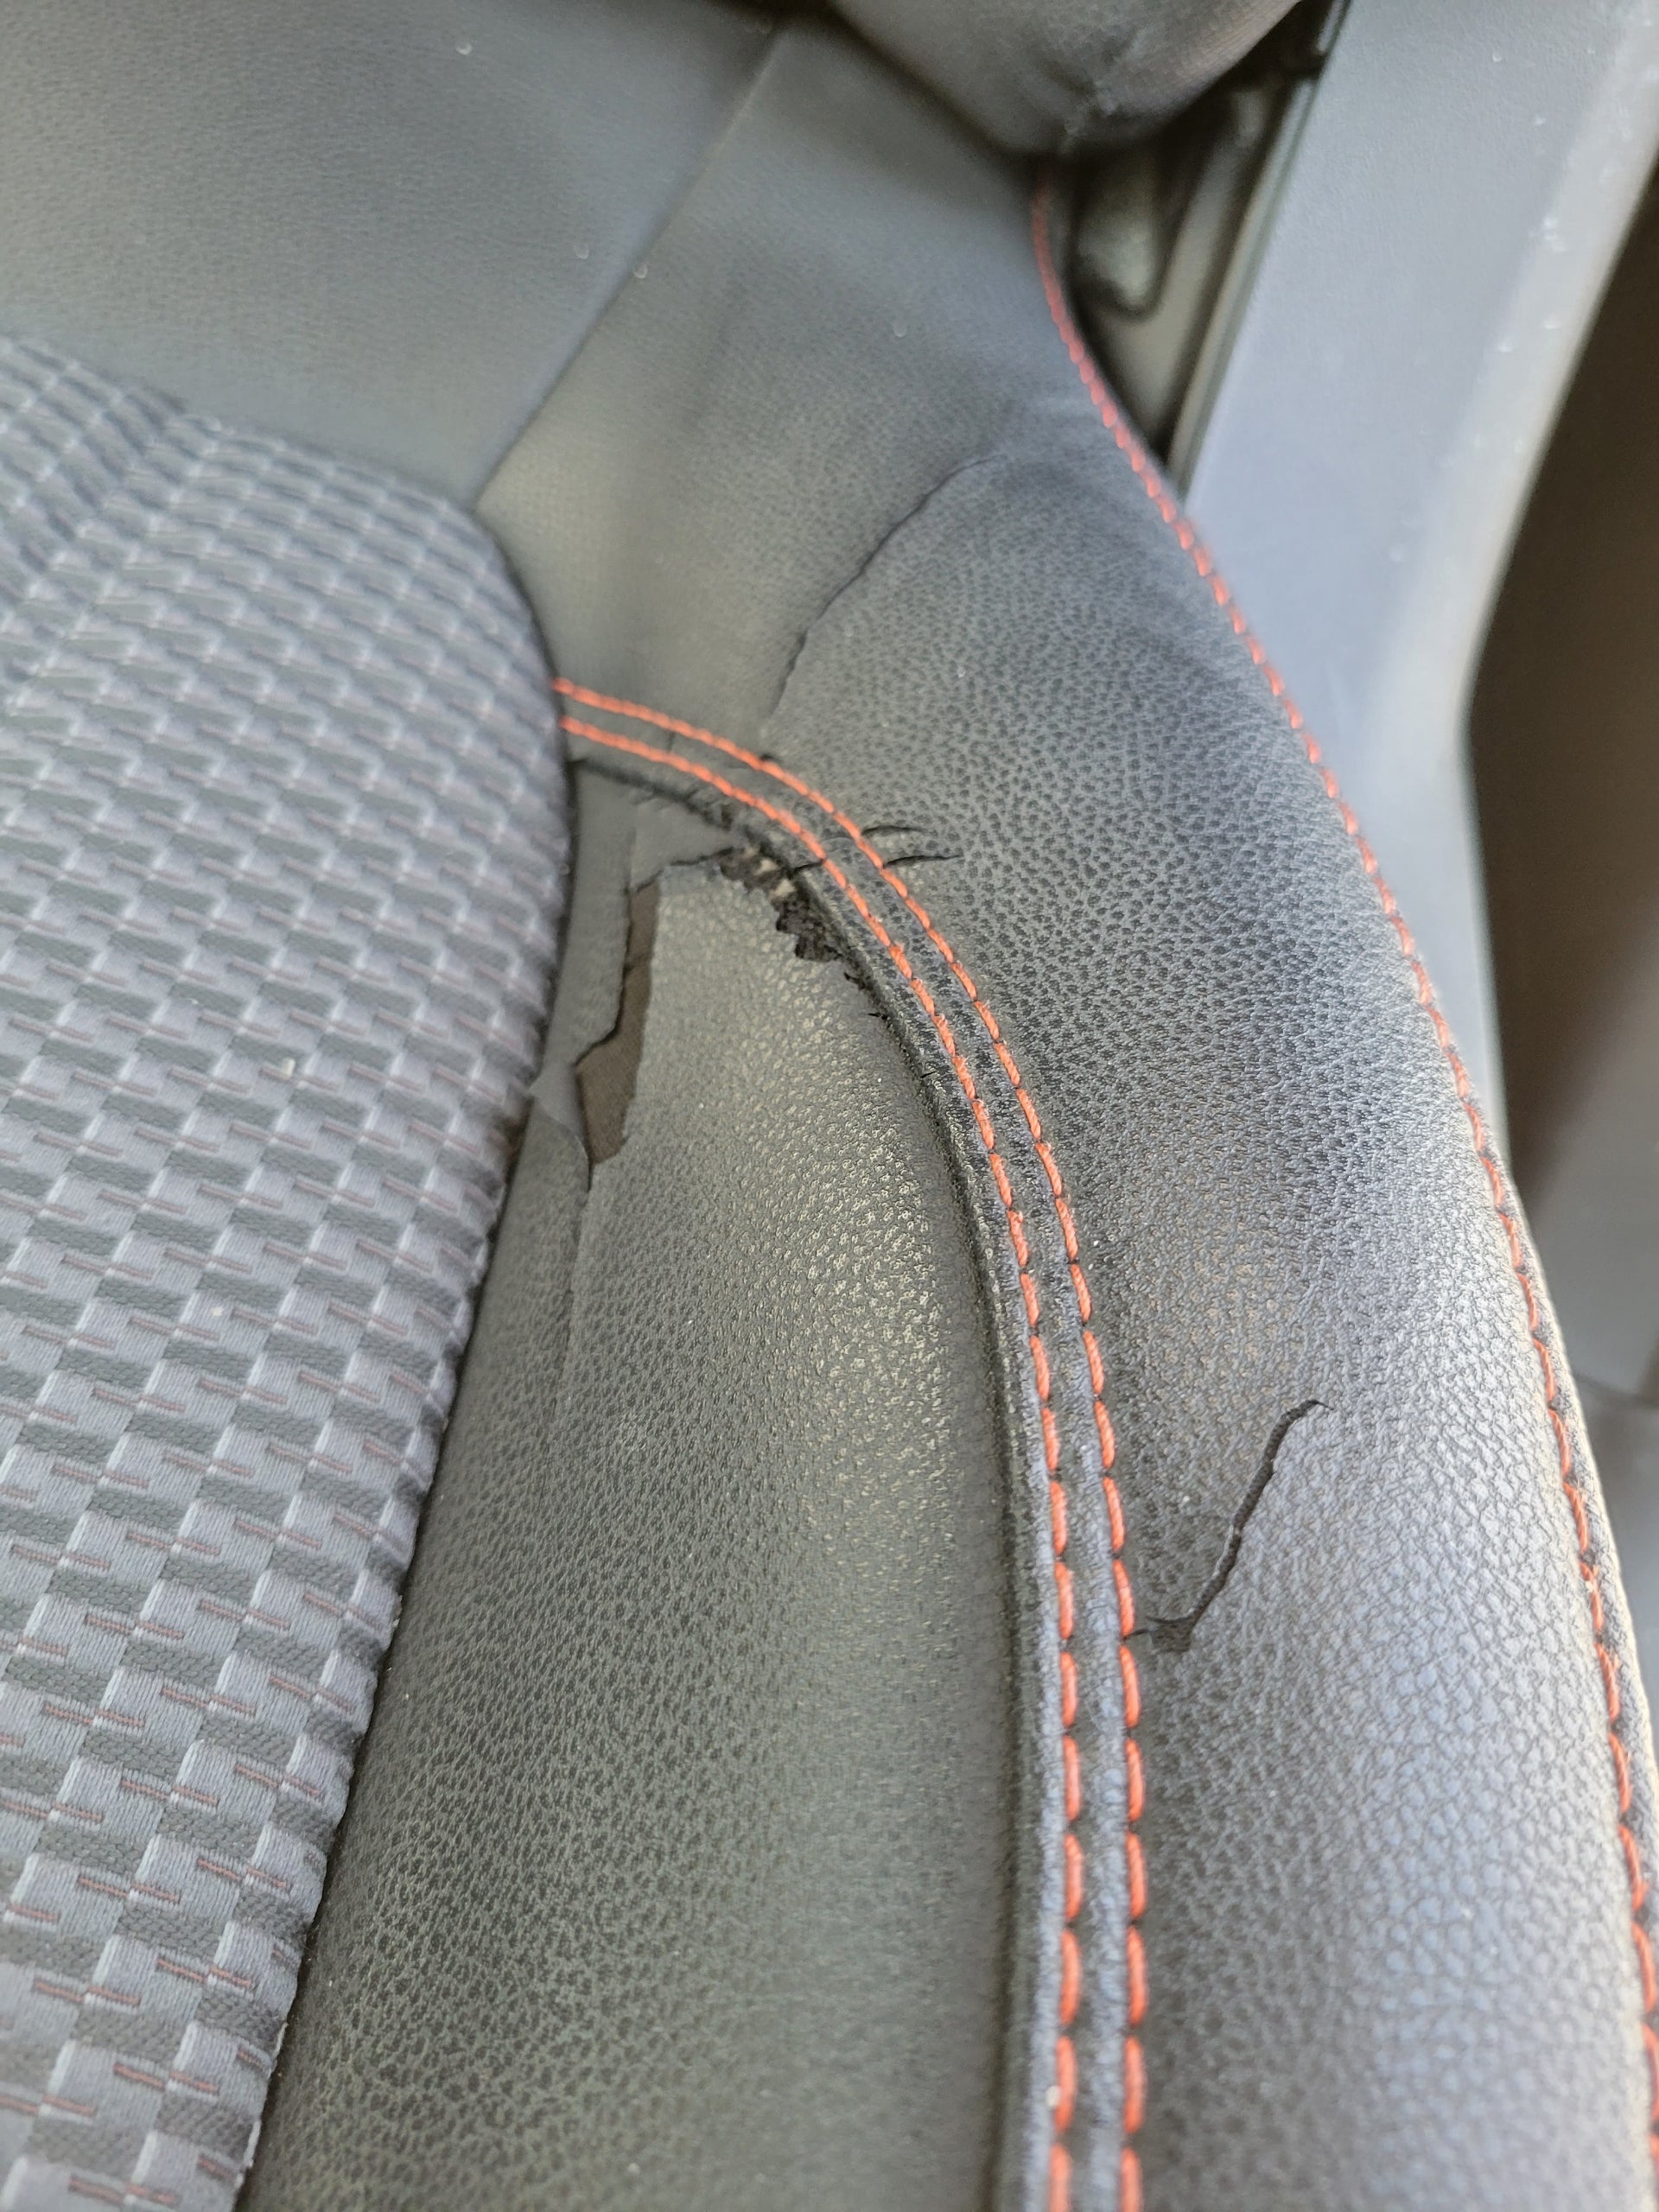 How can I make this cracked leather better? Driver seat from a new sport  car I recently bought. : r/fixit